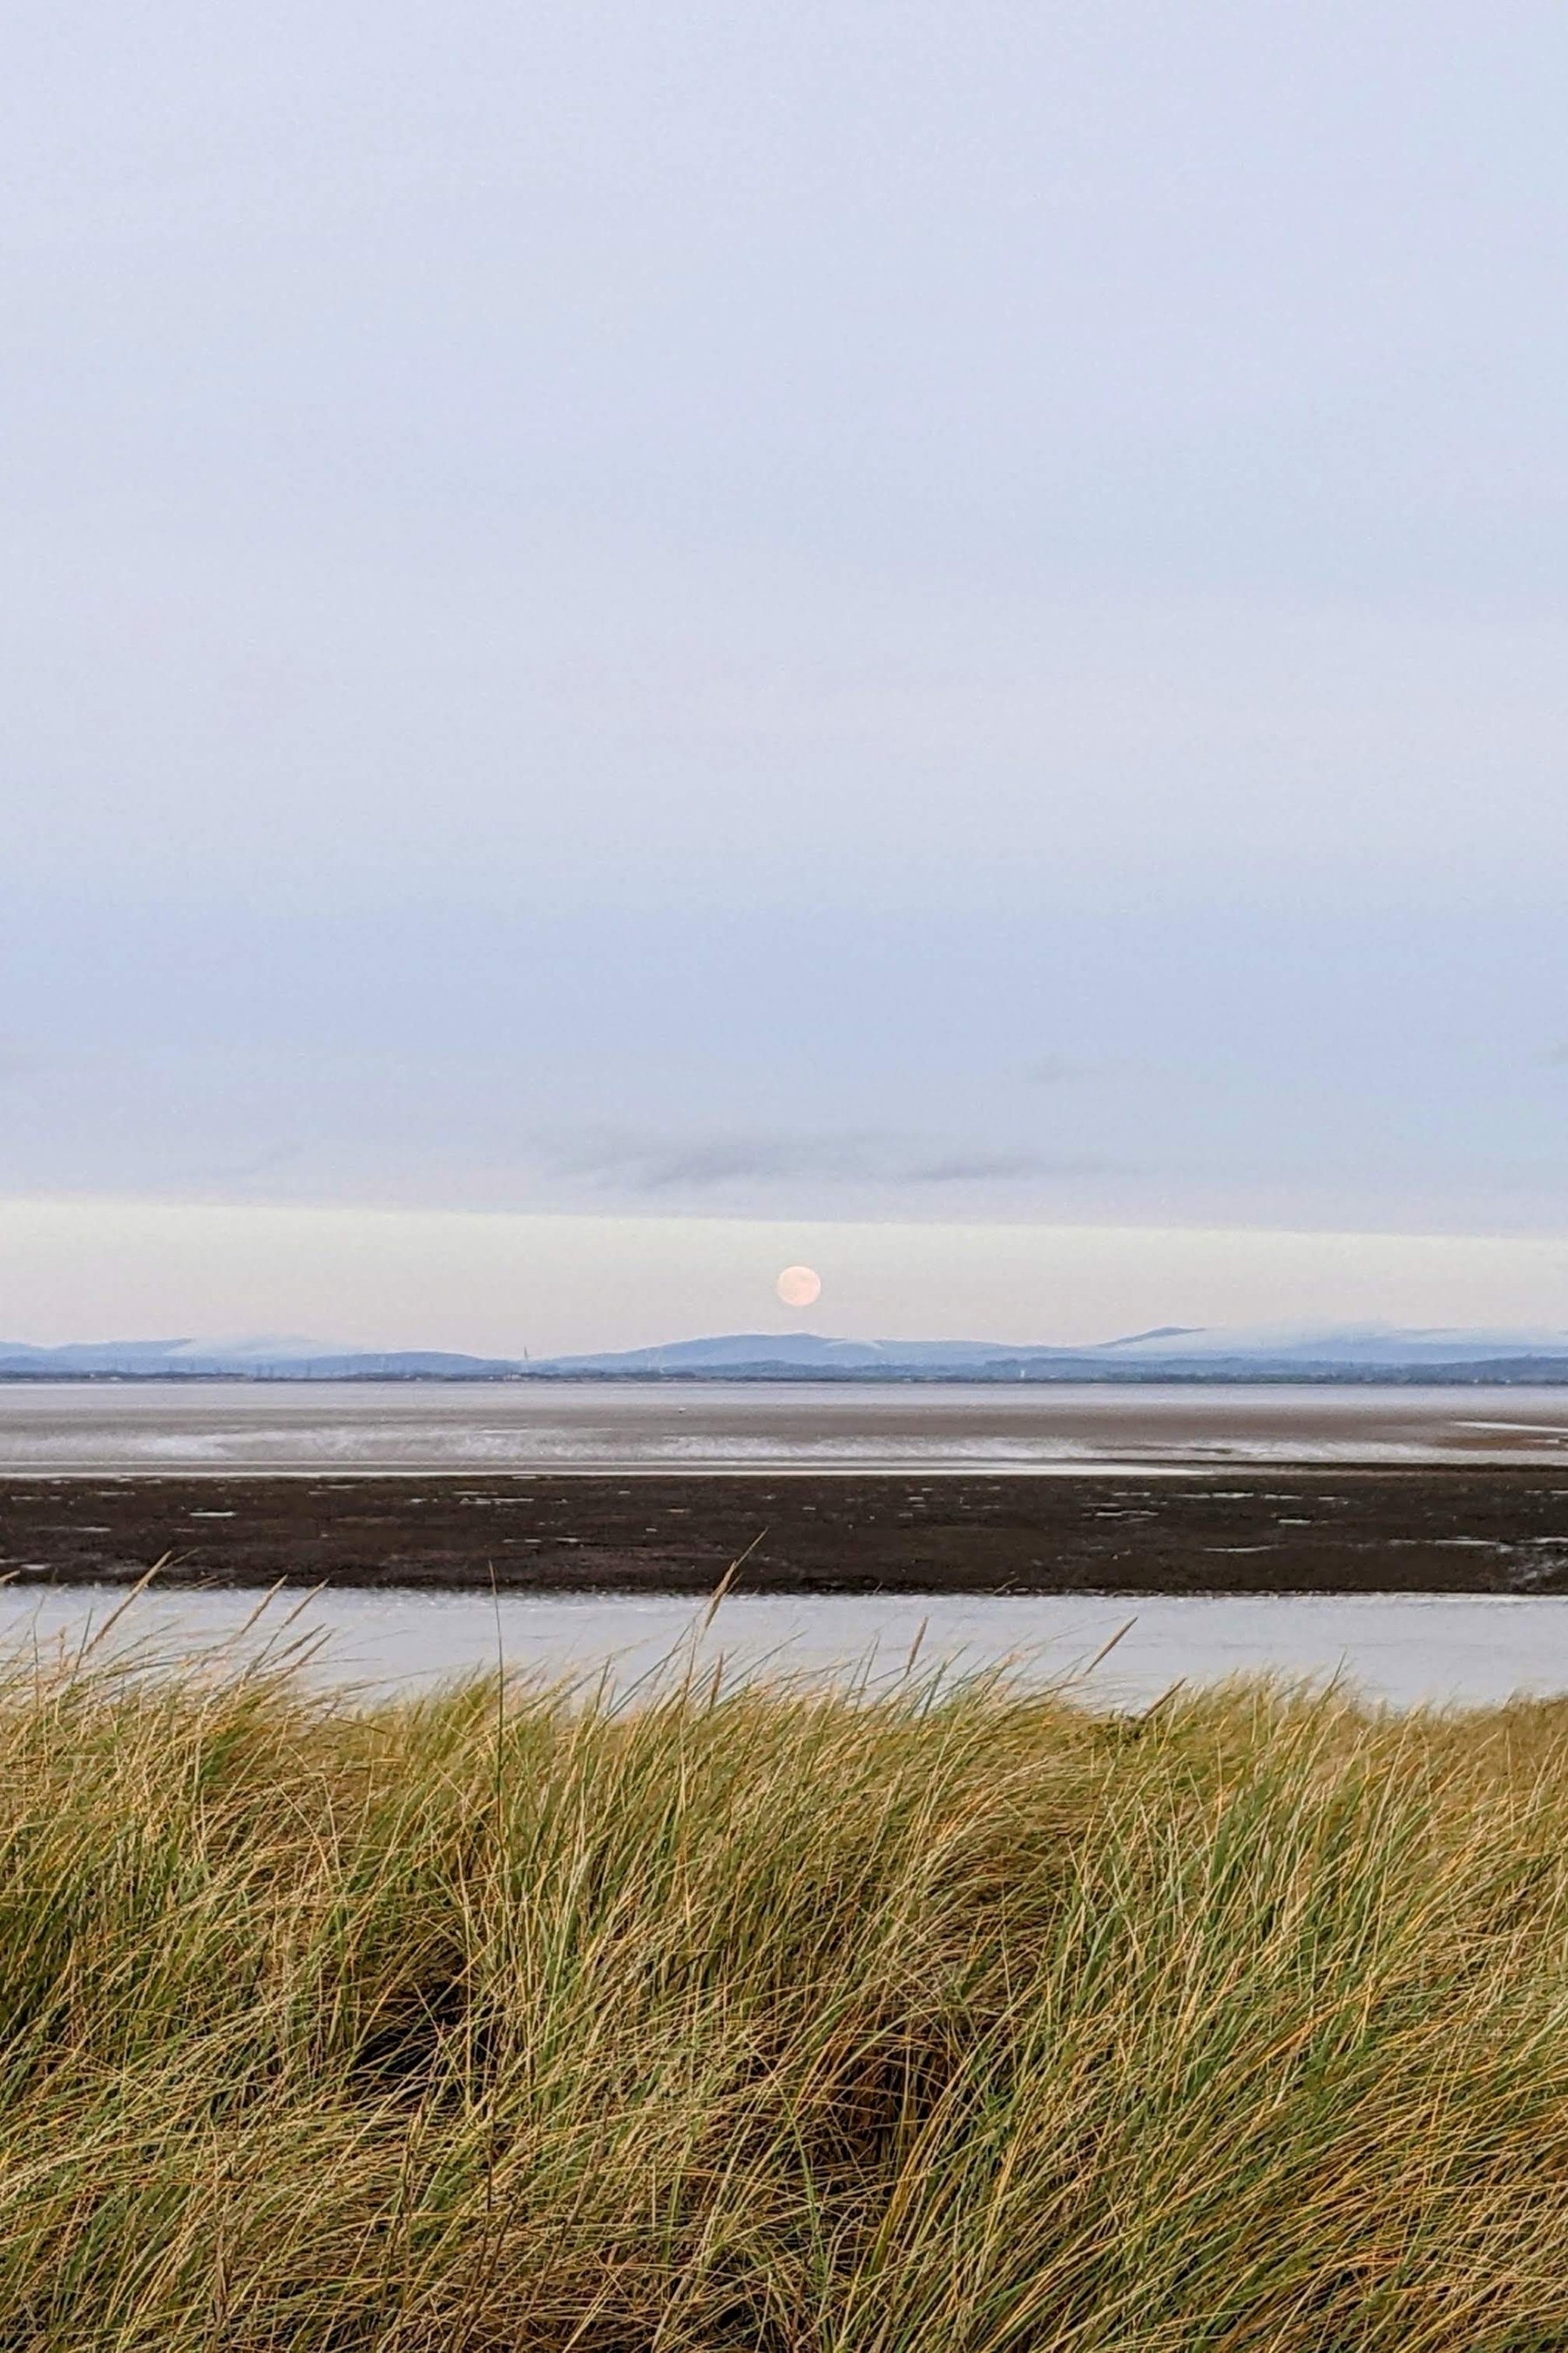 Big full moon rising on the horizon over the distant hills of the Lake District